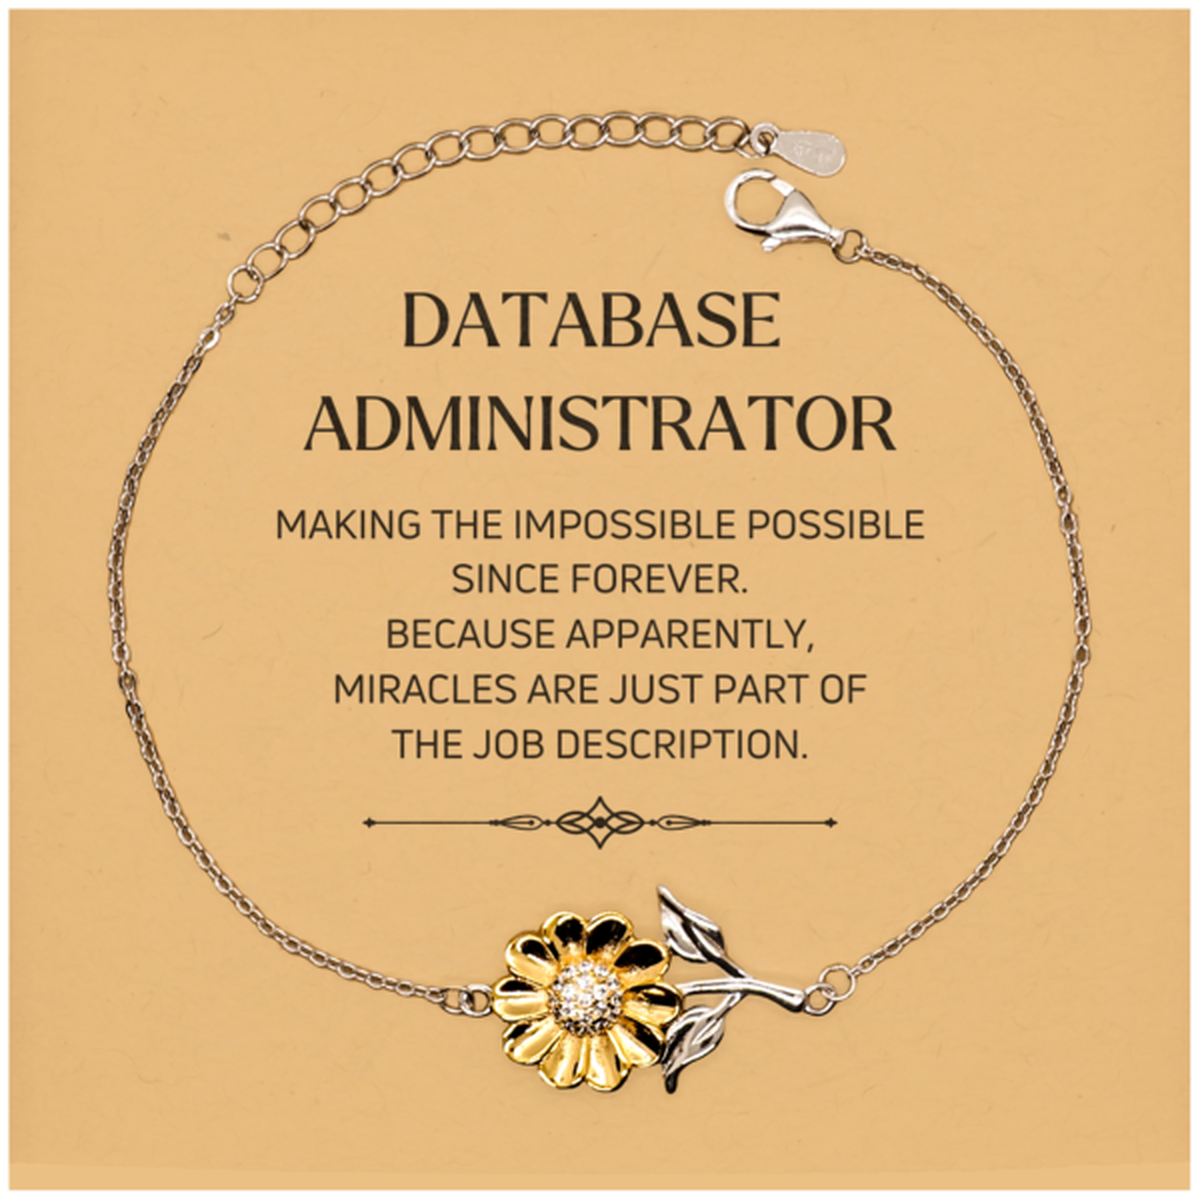 Funny Database Administrator Gifts, Miracles are just part of the job description, Inspirational Birthday Christmas Sunflower Bracelet For Database Administrator, Men, Women, Coworkers, Friends, Boss